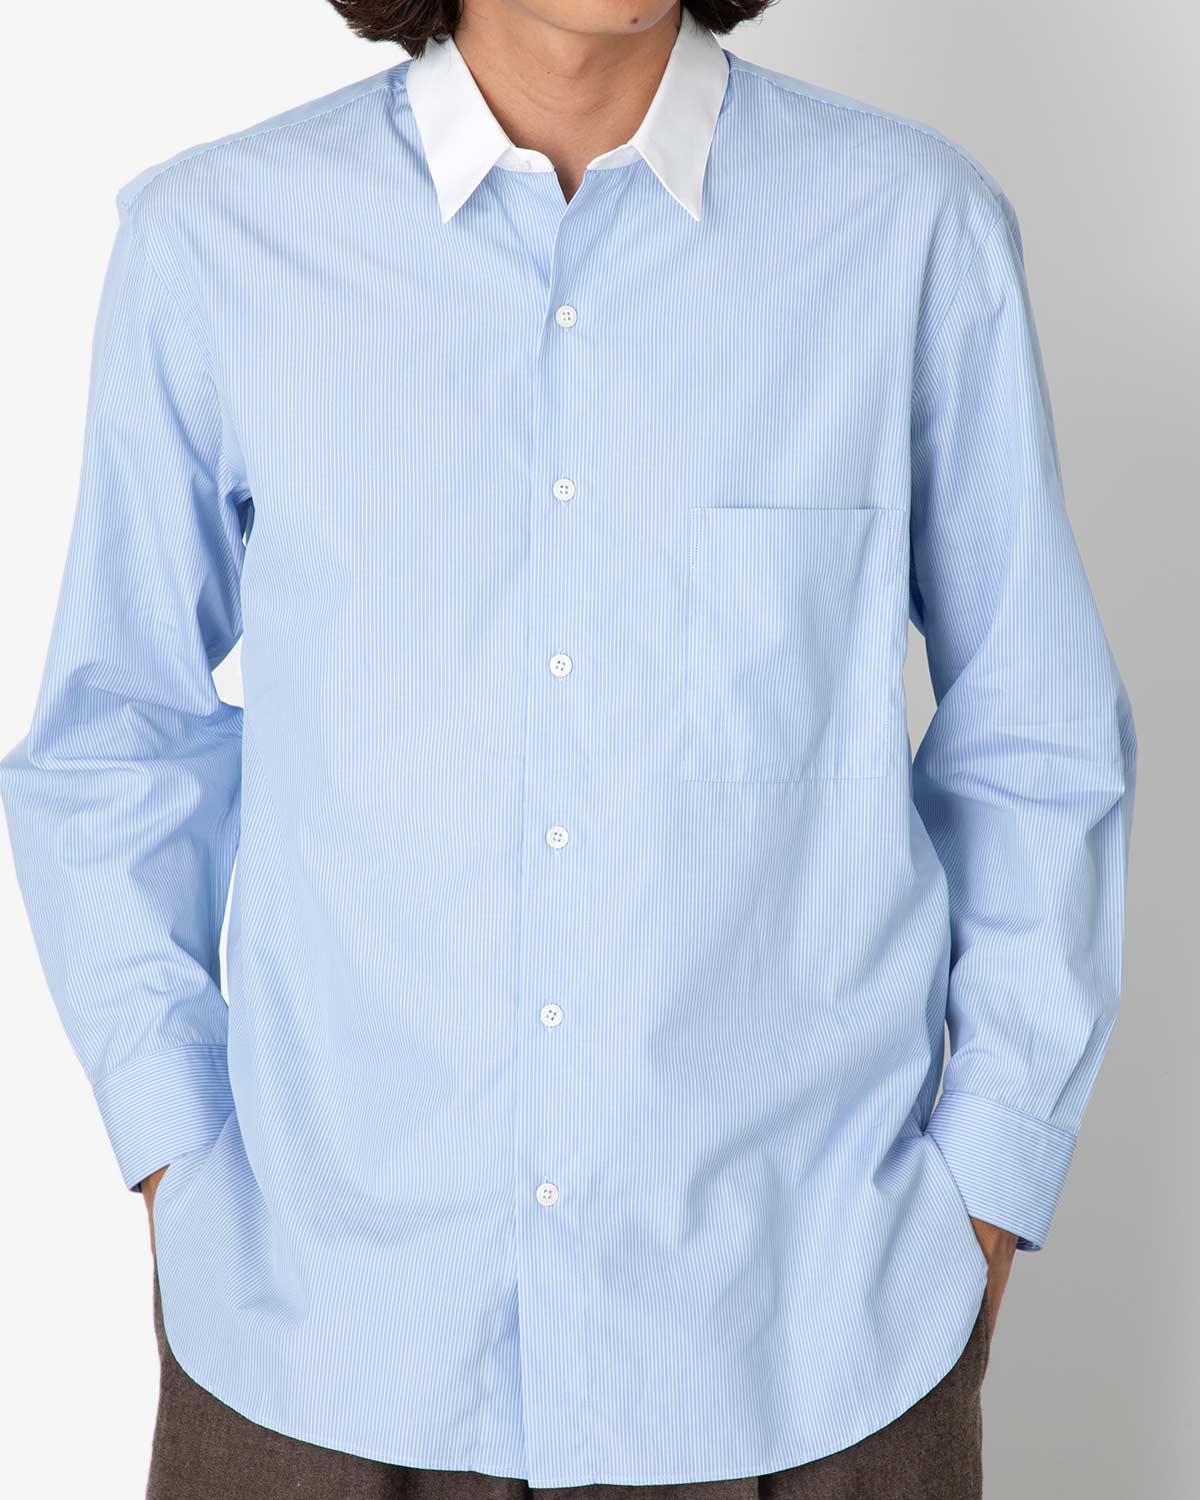 HANDMADE POPELINE MEN’S SHIRT WITH CONTRASTED COLLAR